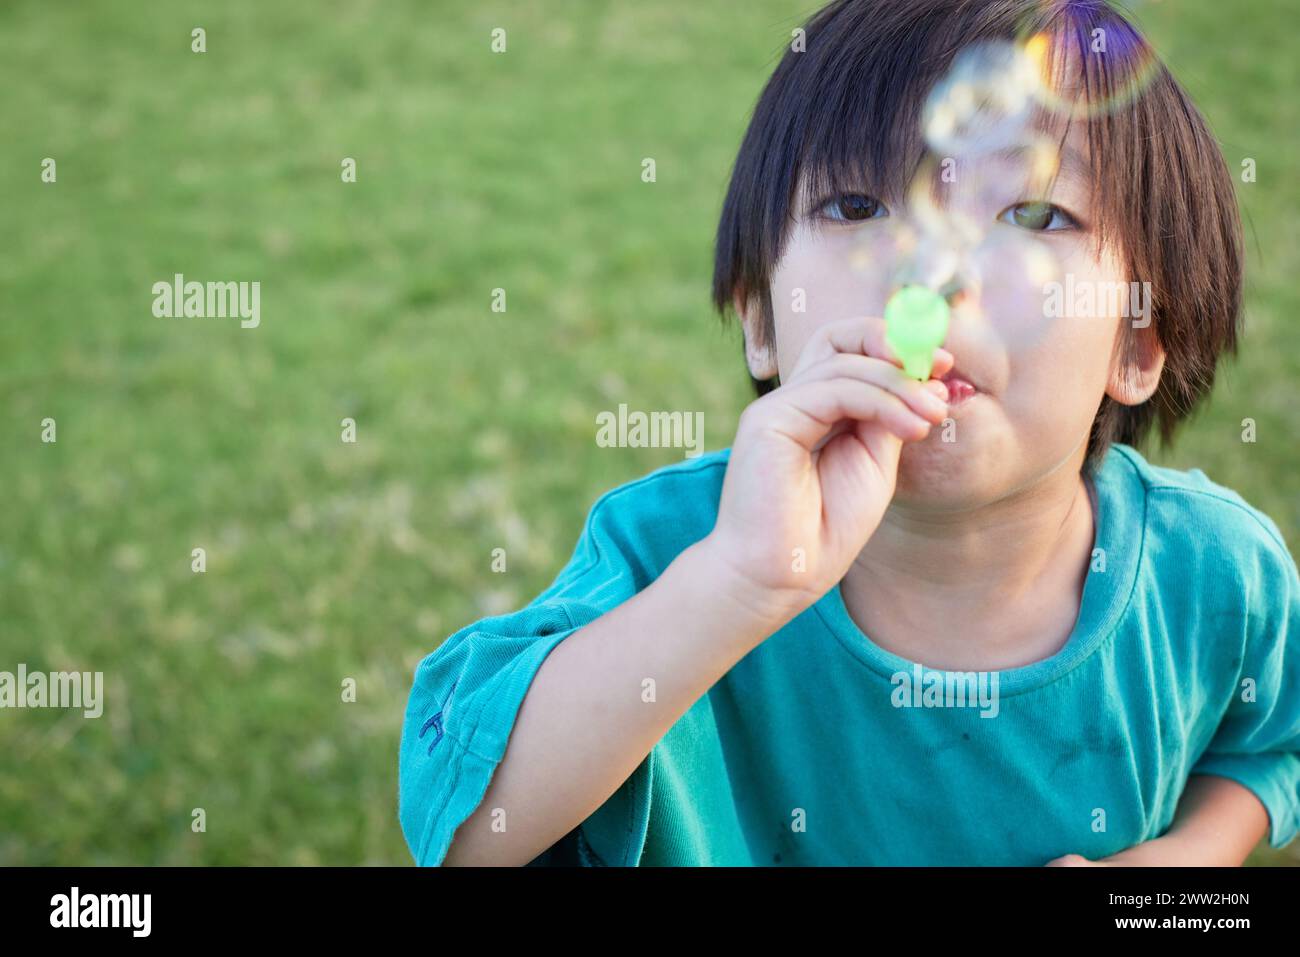 Kid playing in a field Stock Photo